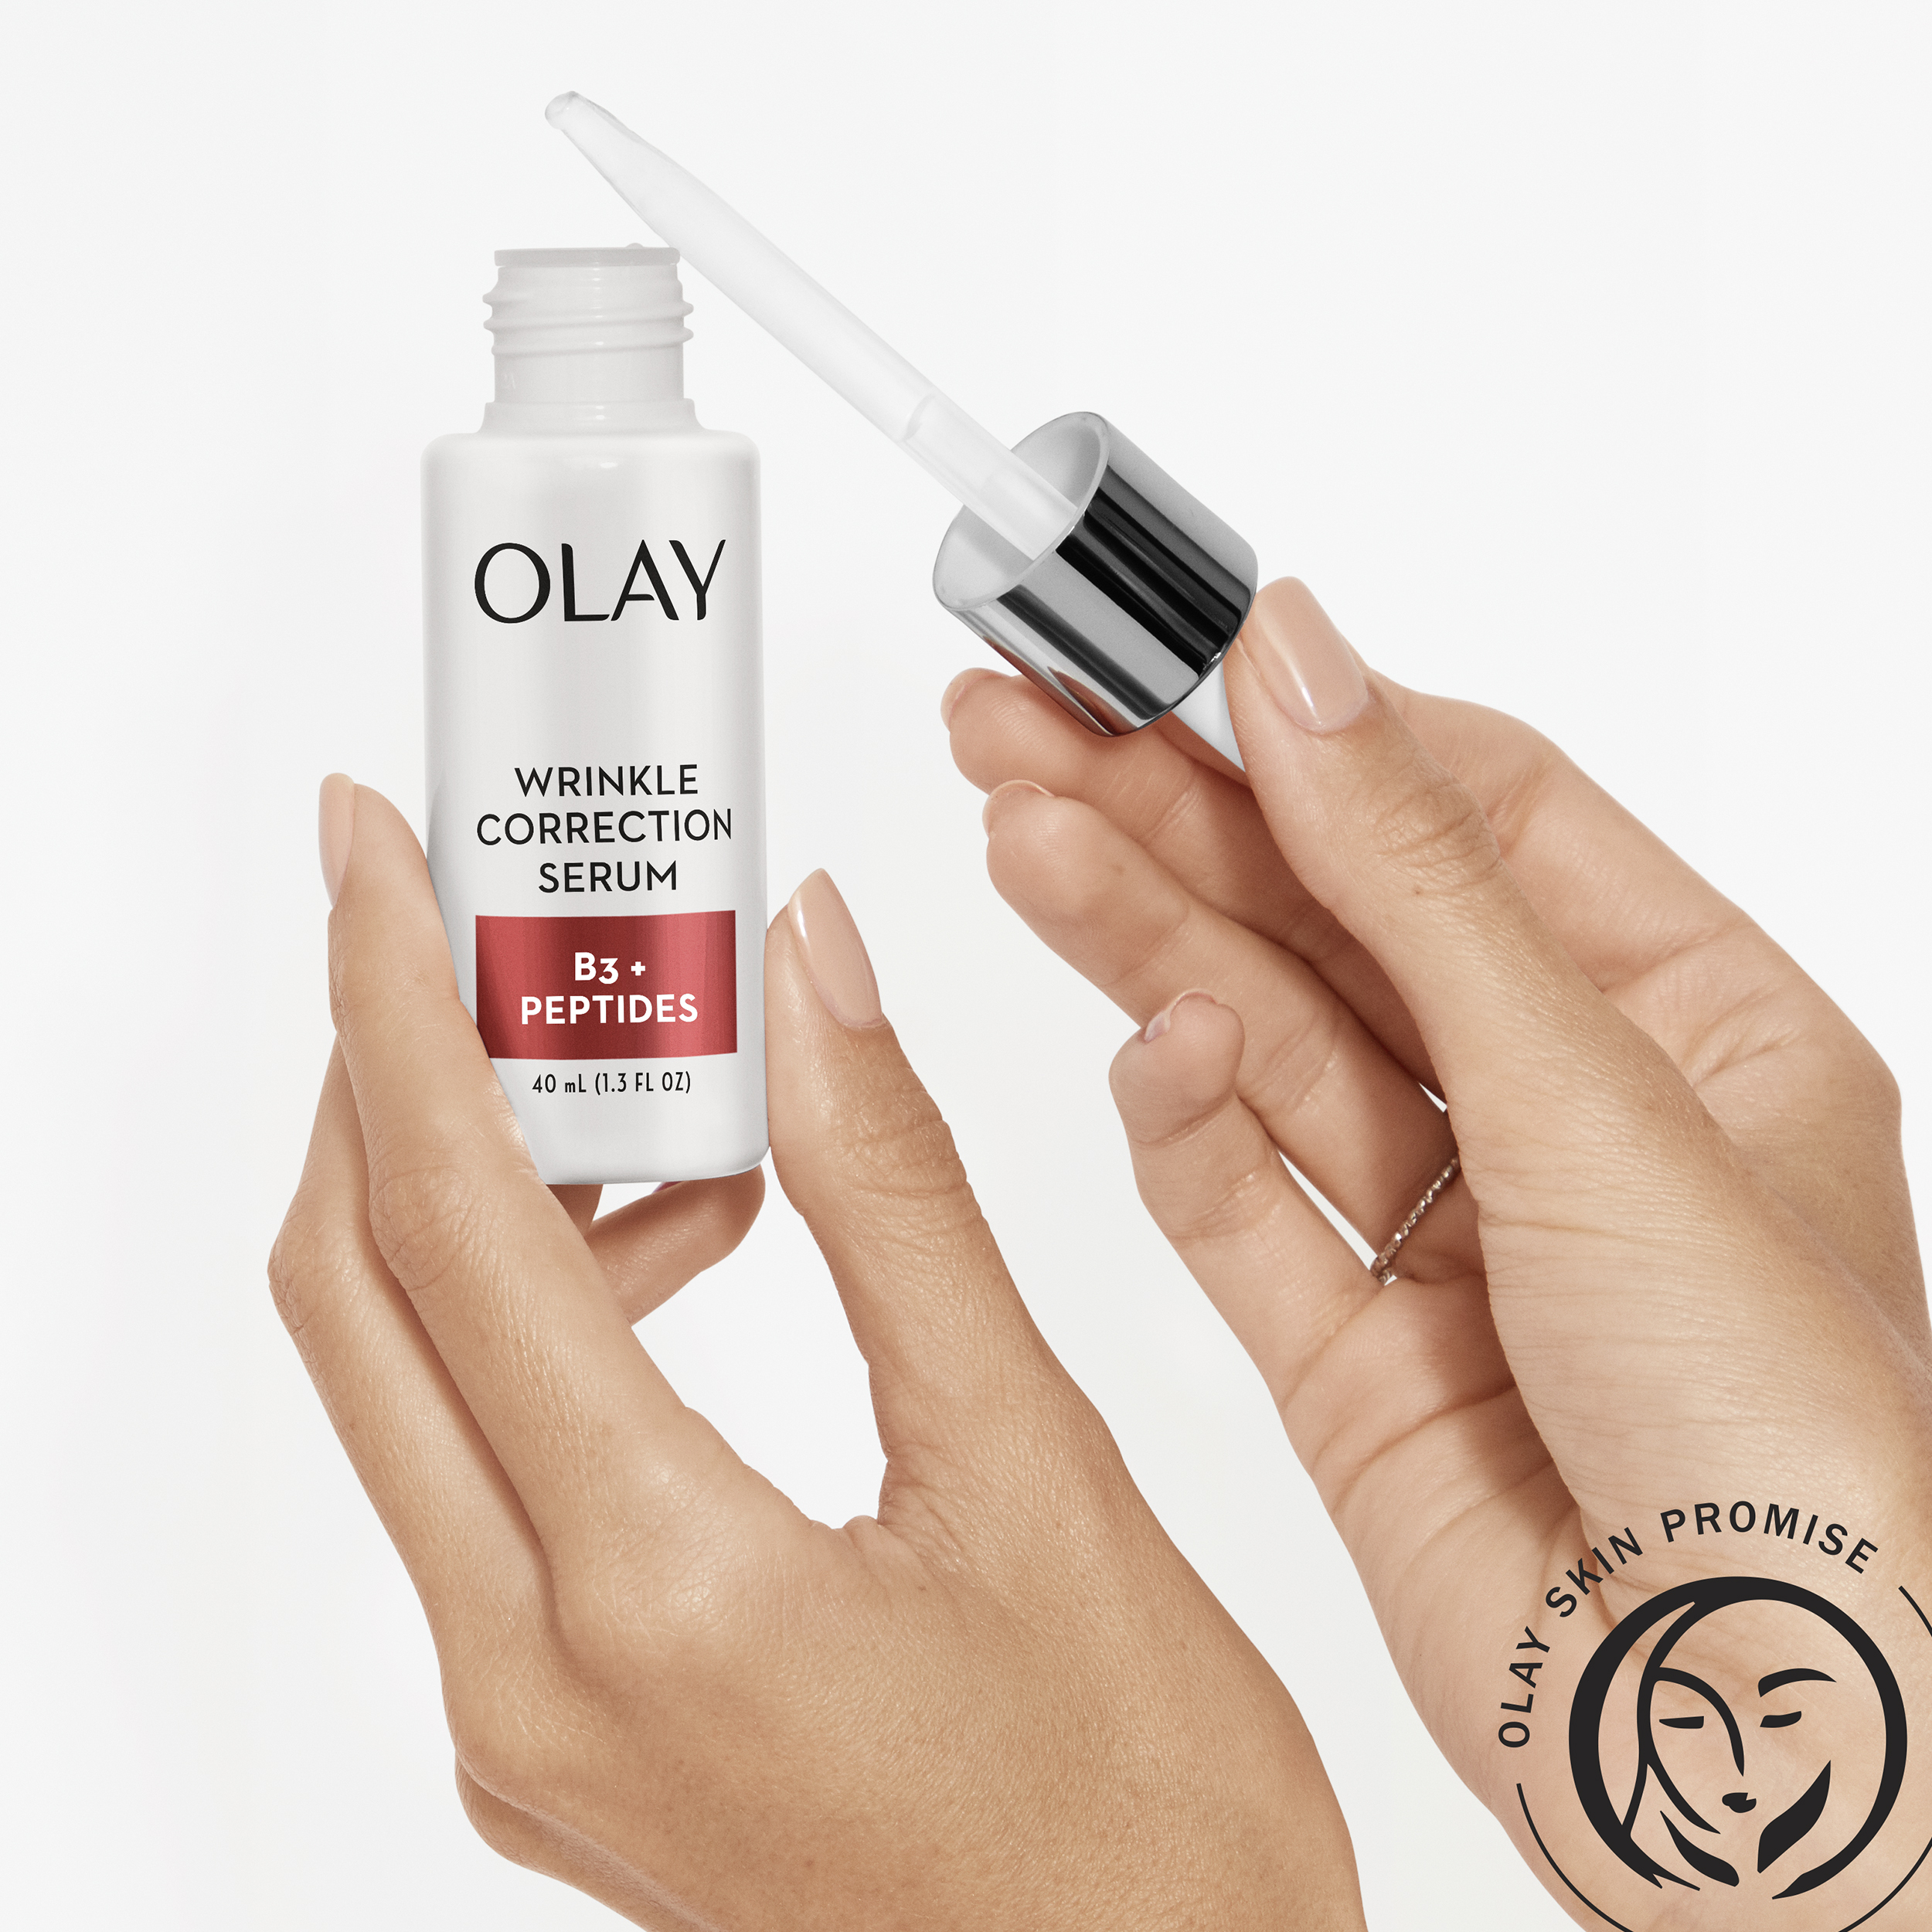 Olay Wrinkle Correction Serum with Vitamin B3+ Collagen Peptides, 1.3 fl oz - image 5 of 14